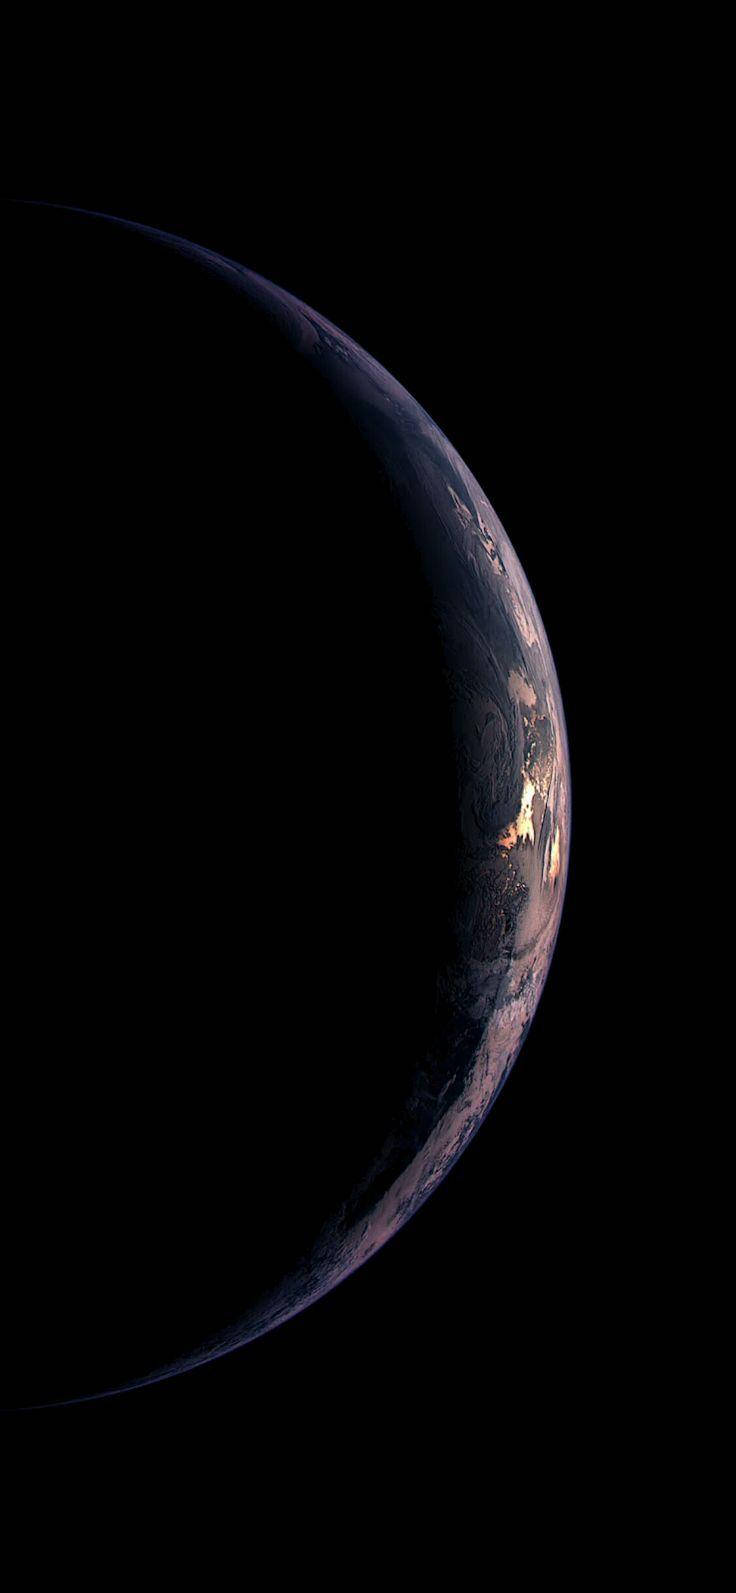 Distinctive Iphone X Amoled Display Featuring A High-resolution Planet Surface Image. Background